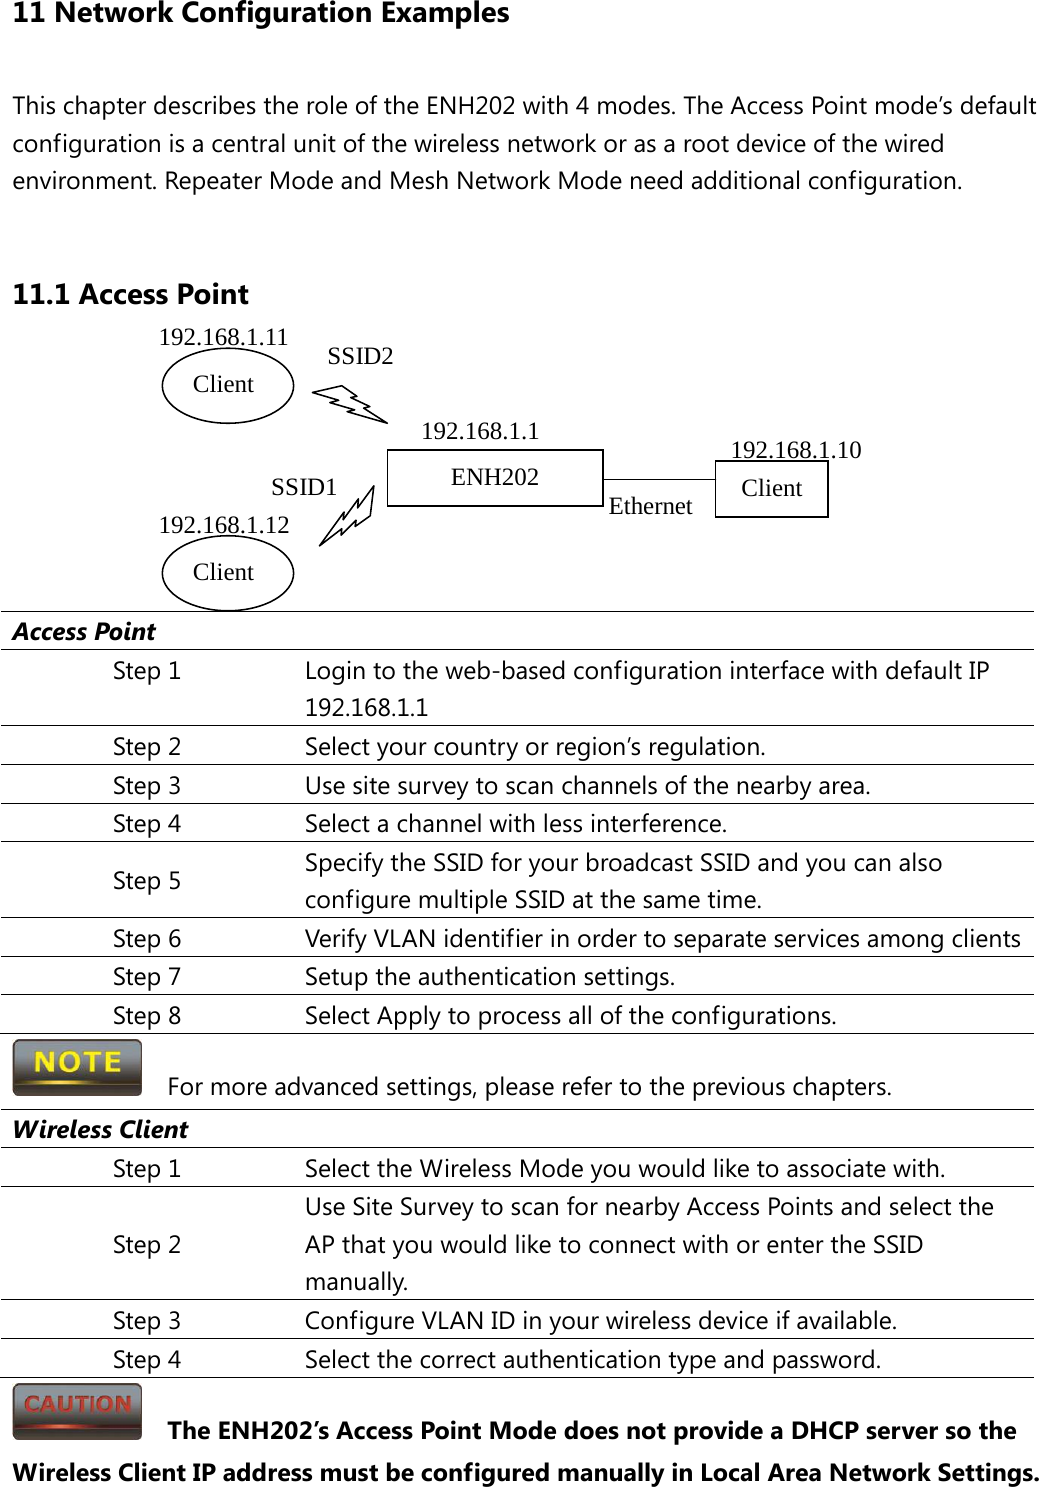 11 Network Configuration Examples This chapter describes the role of the ENH202 with 4 modes. The Access Point mode’s default configuration is a central unit of the wireless network or as a root device of the wired environment. Repeater Mode and Mesh Network Mode need additional configuration.  11.1 Access Point        Access Point Step 1 Login to the web-based configuration interface with default IP 192.168.1.1 Step 2 Select your country or region’s regulation. Step 3 Use site survey to scan channels of the nearby area. Step 4 Select a channel with less interference. Step 5 Specify the SSID for your broadcast SSID and you can also configure multiple SSID at the same time.   Step 6 Verify VLAN identifier in order to separate services among clients Step 7 Setup the authentication settings. Step 8 Select Apply to process all of the configurations.   For more advanced settings, please refer to the previous chapters. Wireless Client Step 1 Select the Wireless Mode you would like to associate with. Step 2 Use Site Survey to scan for nearby Access Points and select the AP that you would like to connect with or enter the SSID manually. Step 3 Configure VLAN ID in your wireless device if available. Step 4 Select the correct authentication type and password.   The ENH202’s Access Point Mode does not provide a DHCP server so the Wireless Client IP address must be configured manually in Local Area Network Settings. ENH202 Client Client SSID2 SSID1 Ethernet Client  192.168.1.1  192.168.1.10 192.168.1.11 192.168.1.12 